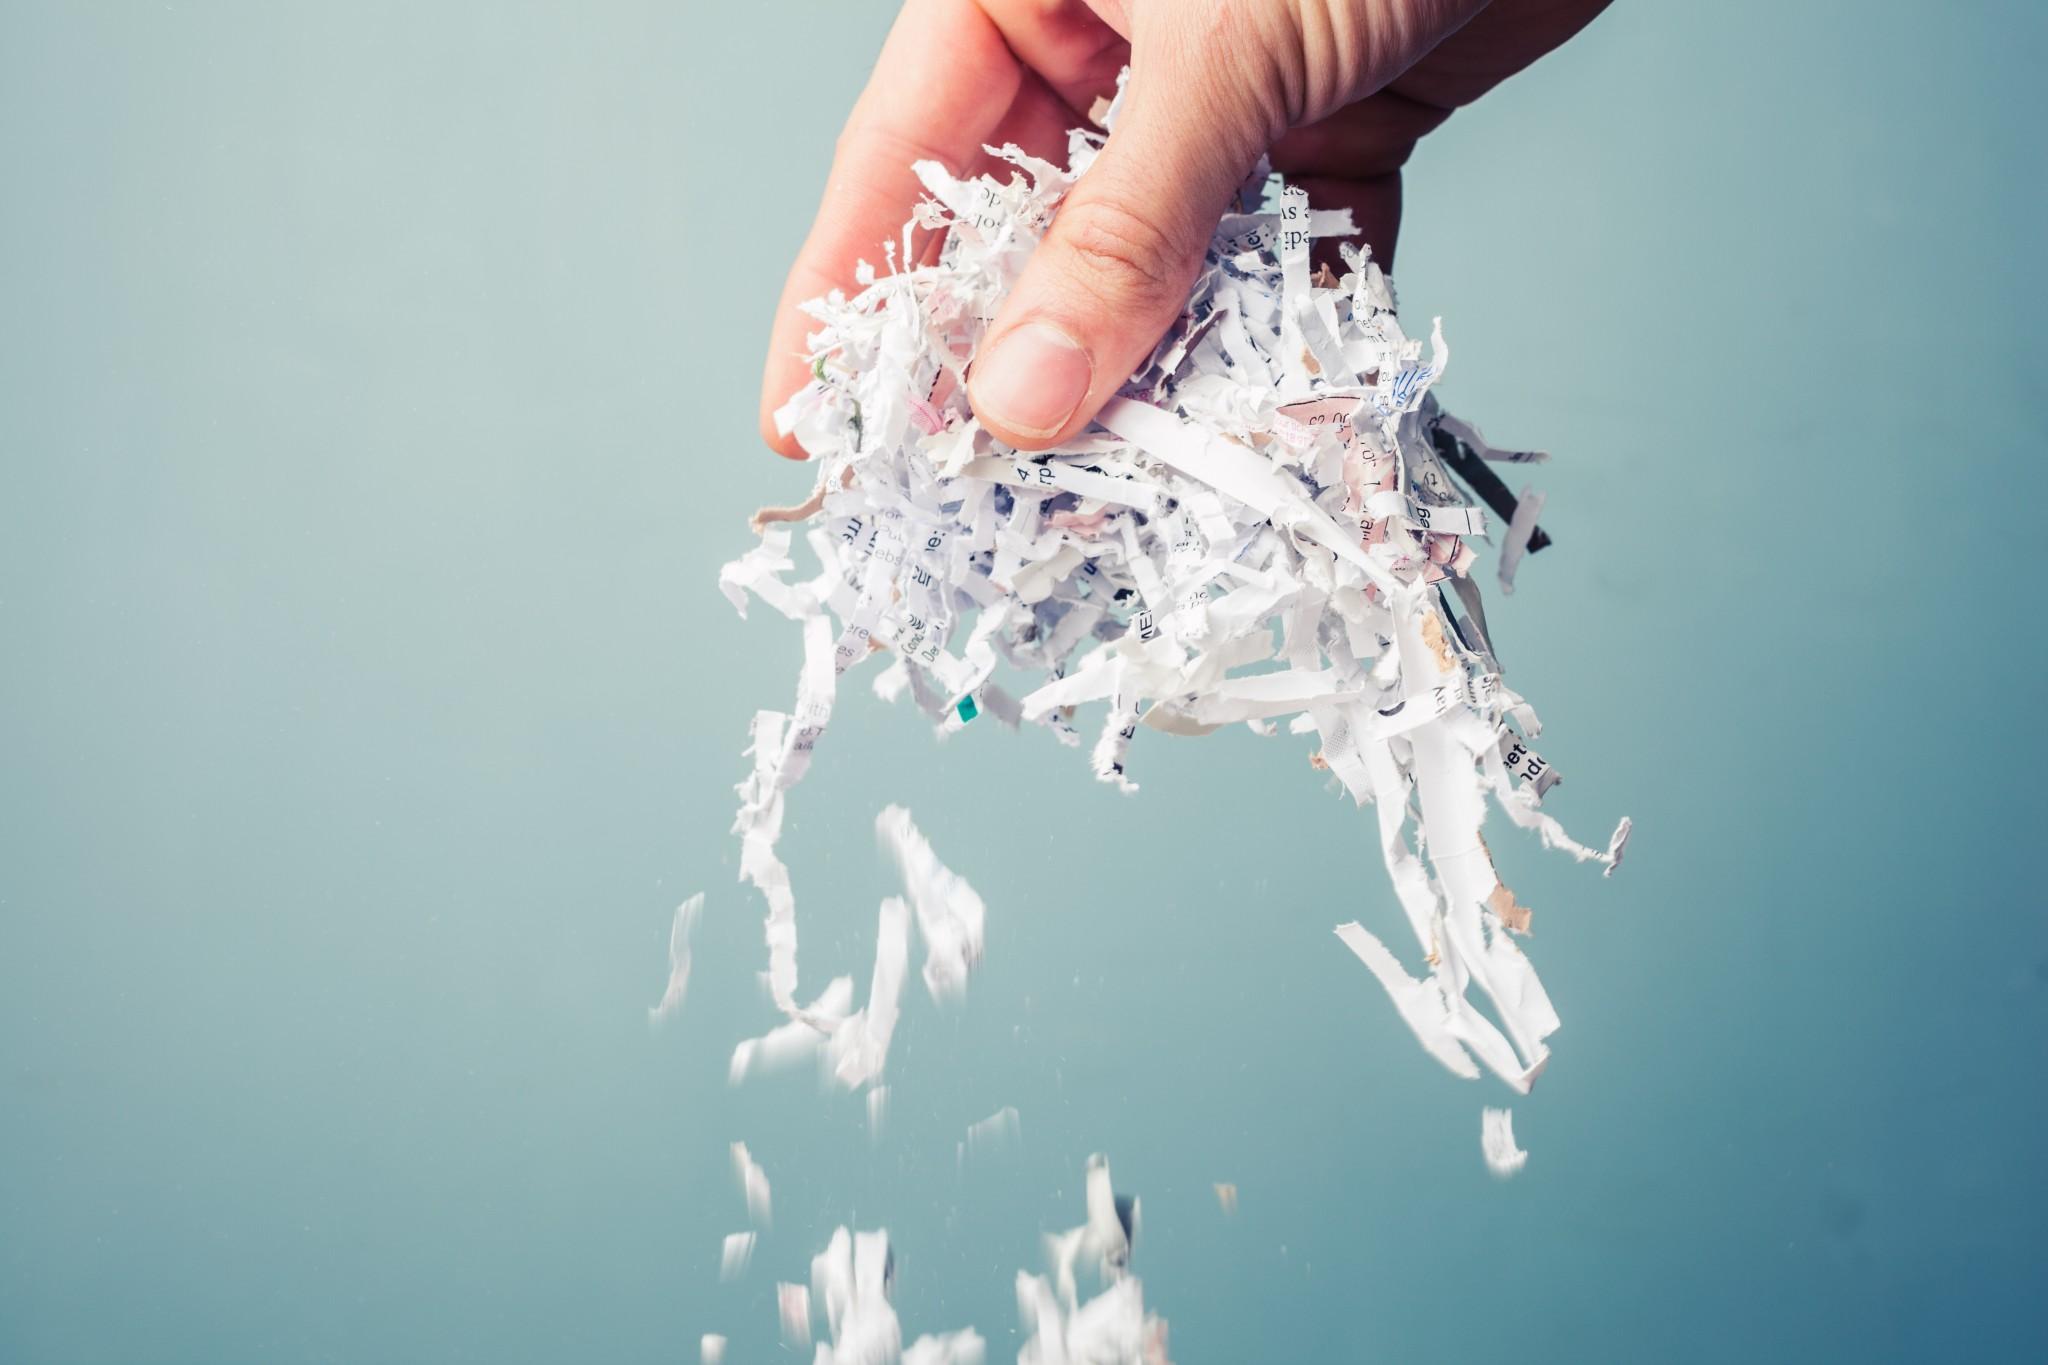 A hand holds shredded paper